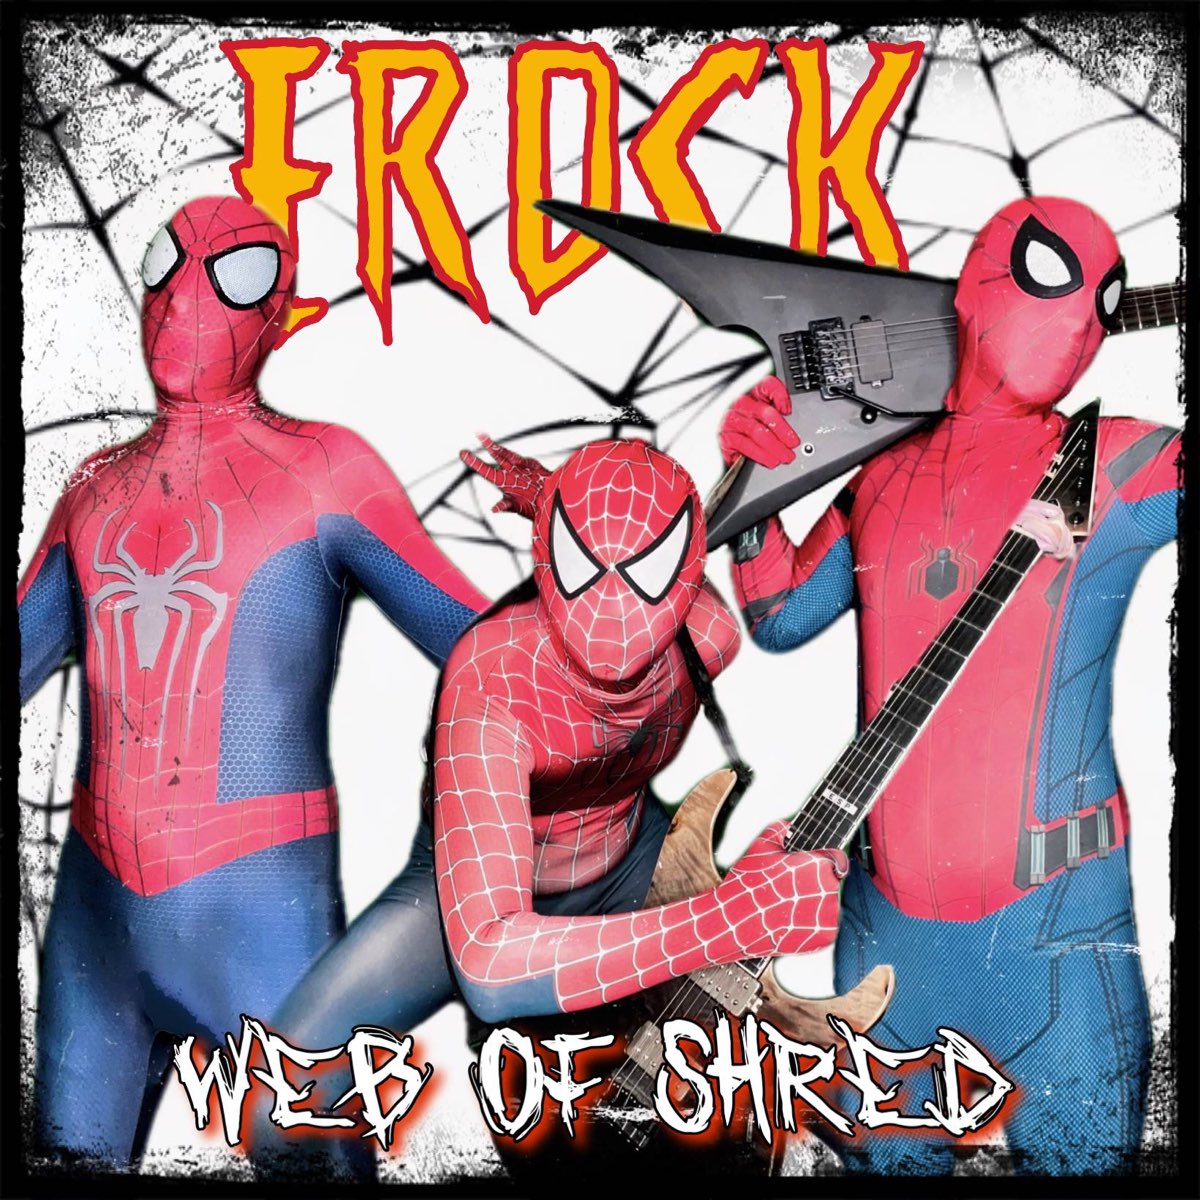 Spider - Man: Web of Shred by Erock on Apple Music